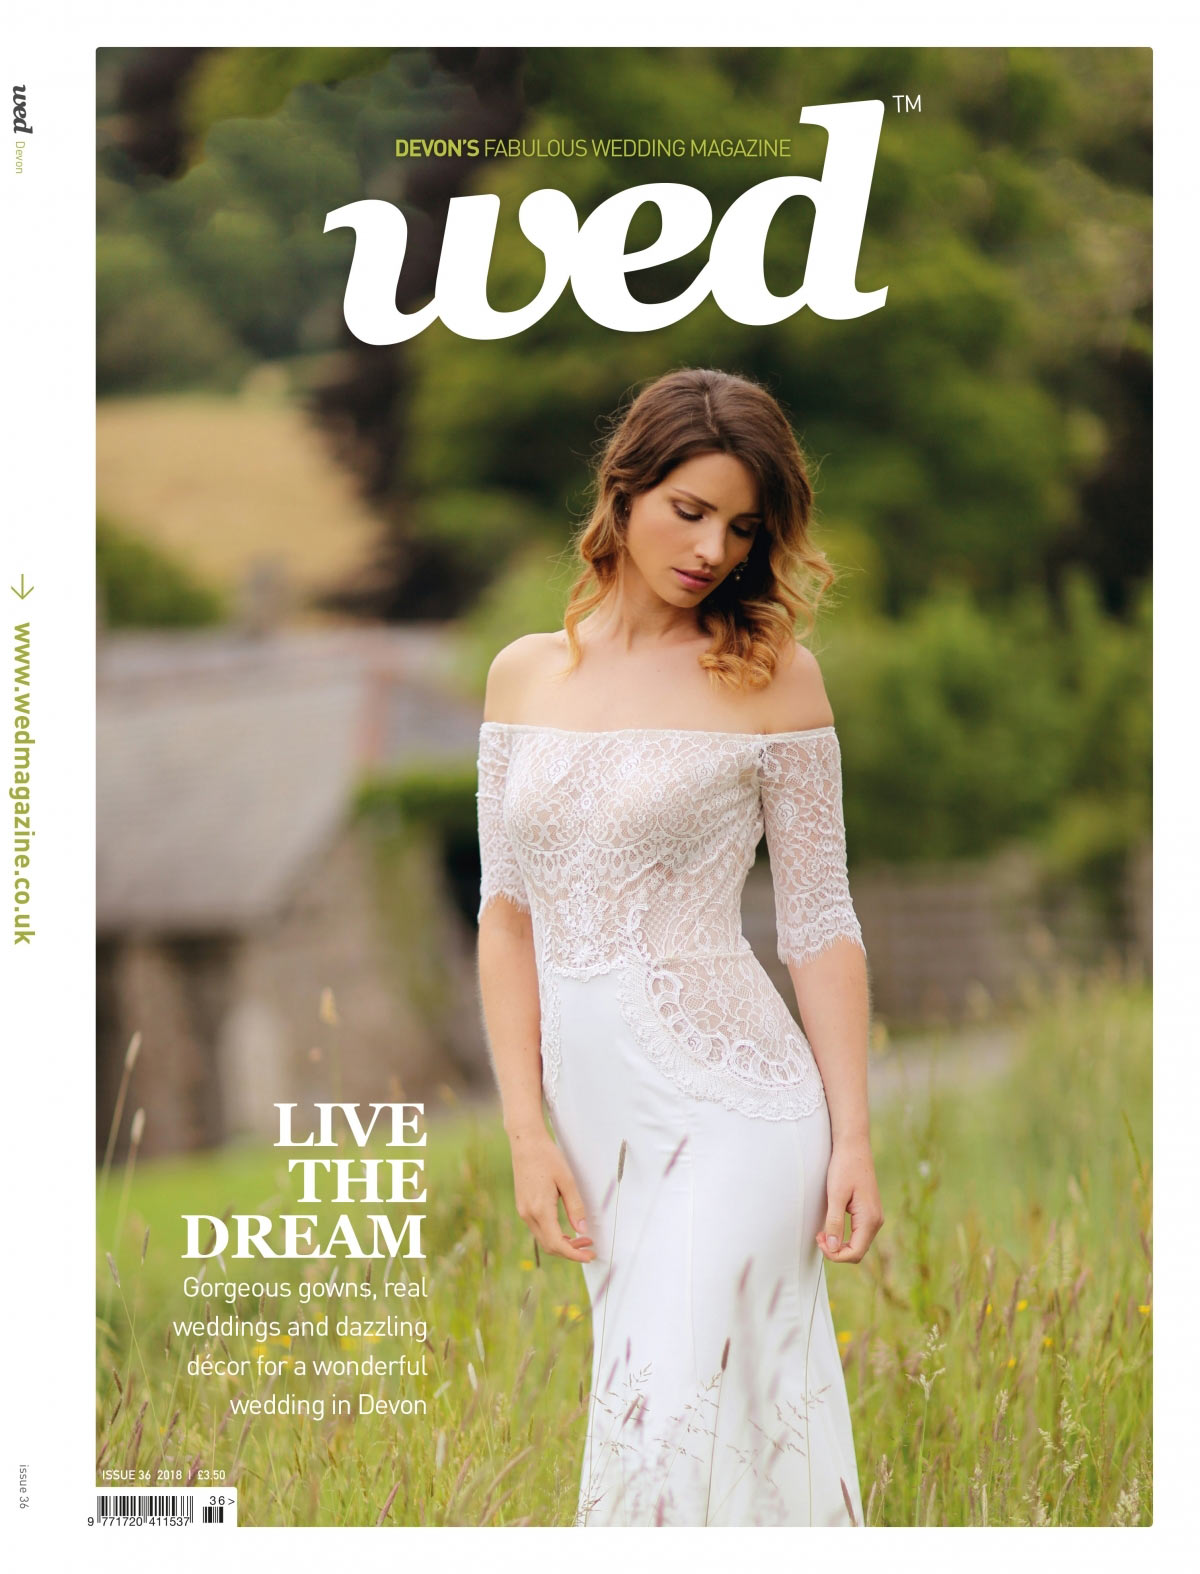 NEW Wed Devon out now!